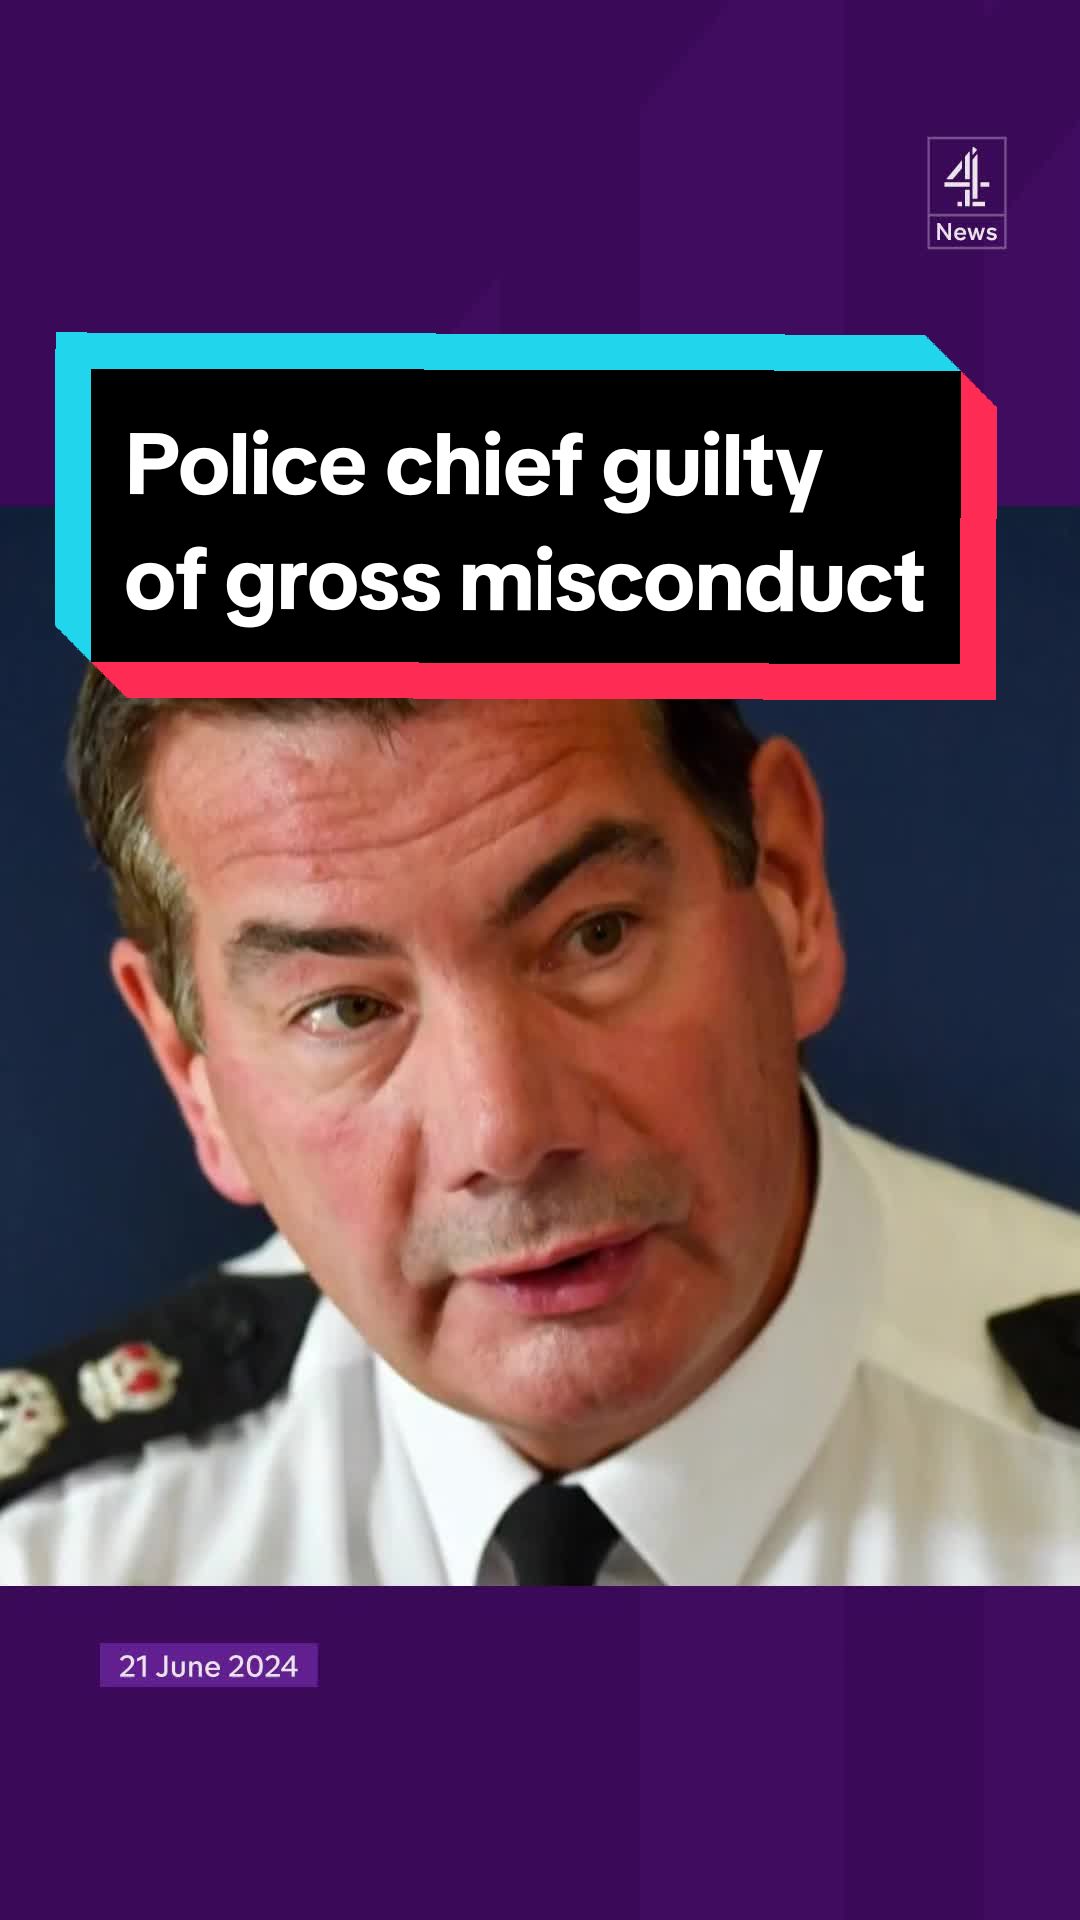 Northamptonshire’s chief constable, Nick Adderley, has been dismissed from his post - after he was found guilty of gross misconduct. He allegedly exaggerated claims about his military service, including wearing a Falklands war medal, despite being 15 at the time of the conflict.   #Police #MilitaryService #Misconduct #C4News